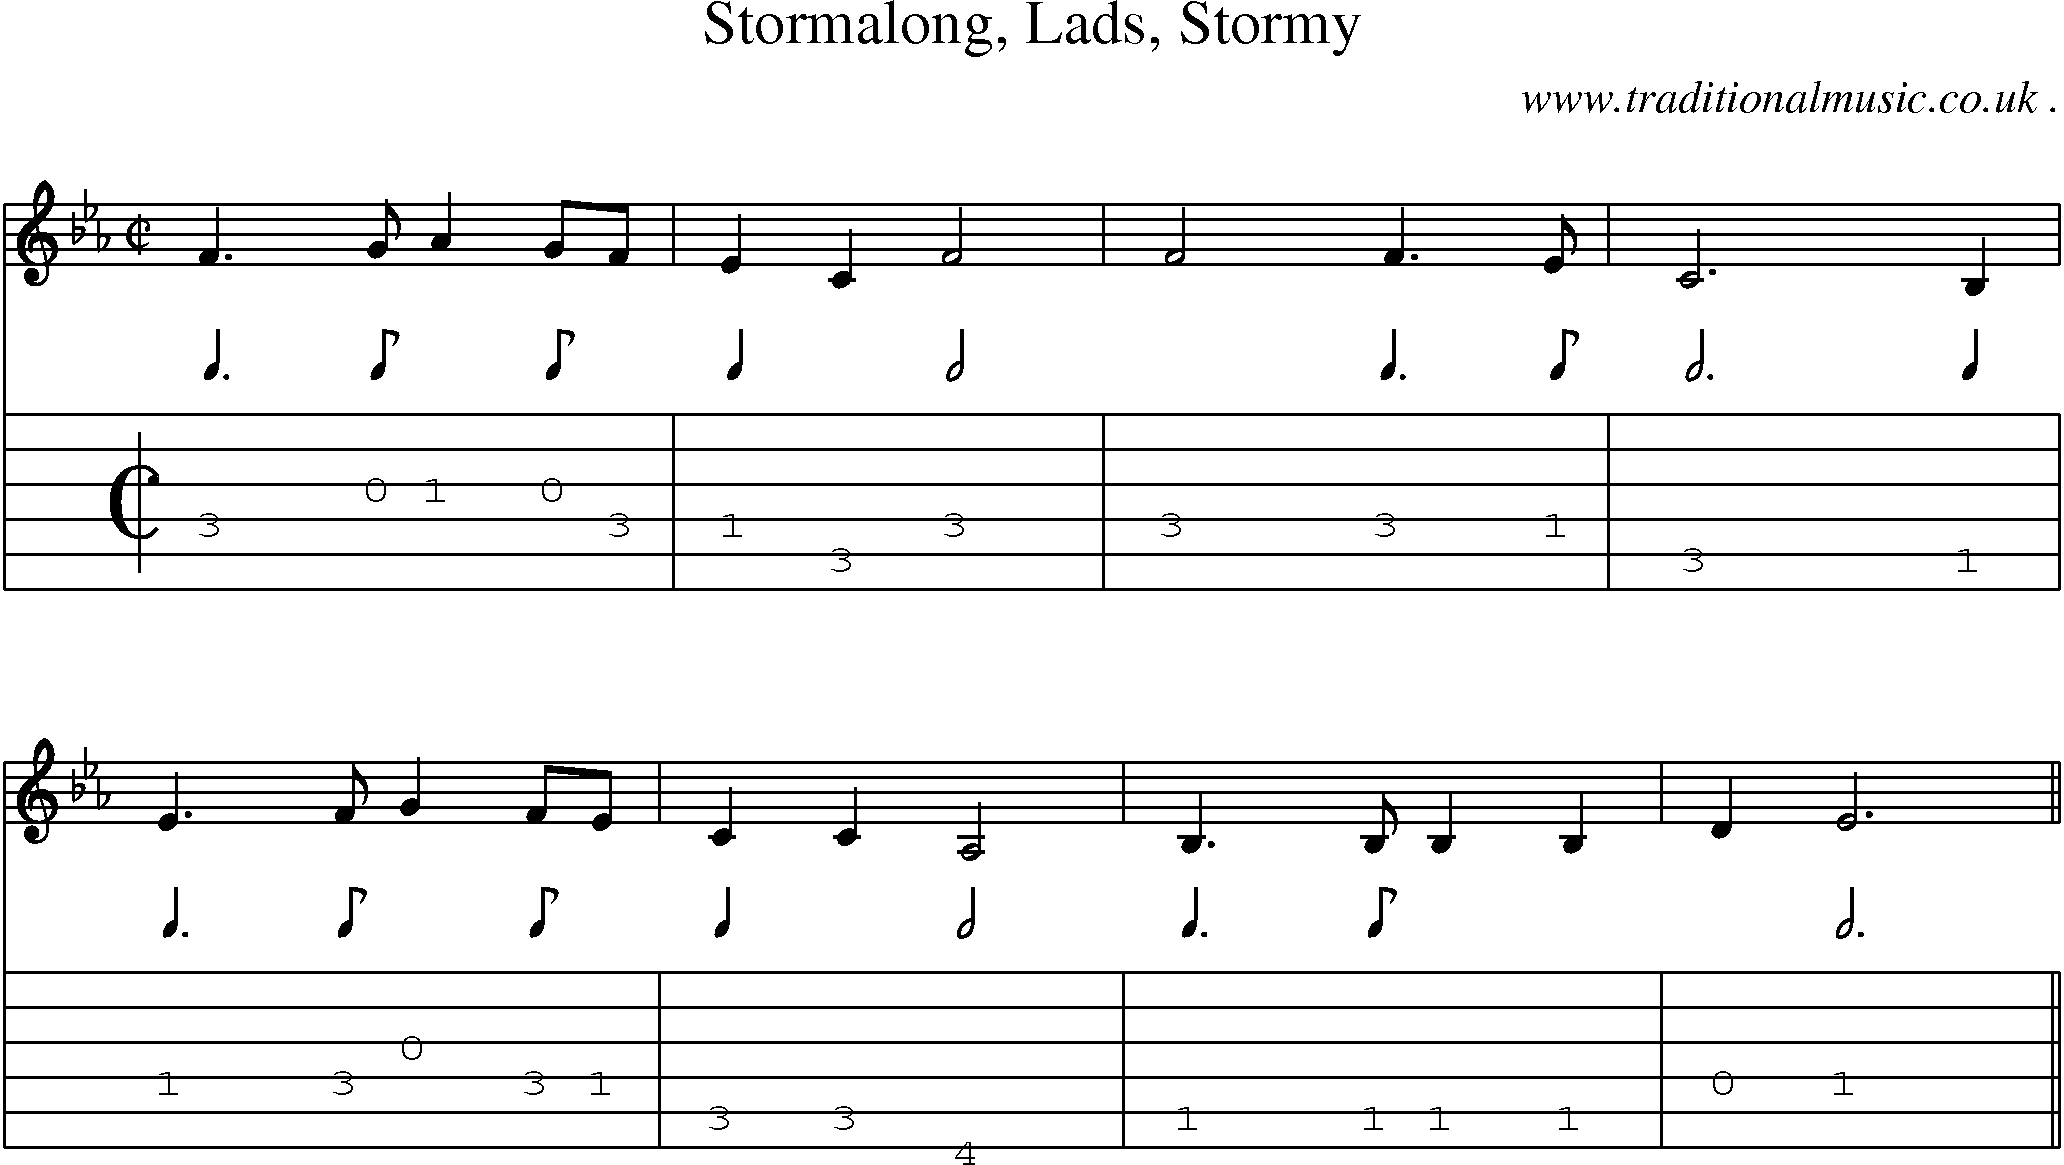 Sheet-Music and Guitar Tabs for Stormalong Lads Stormy